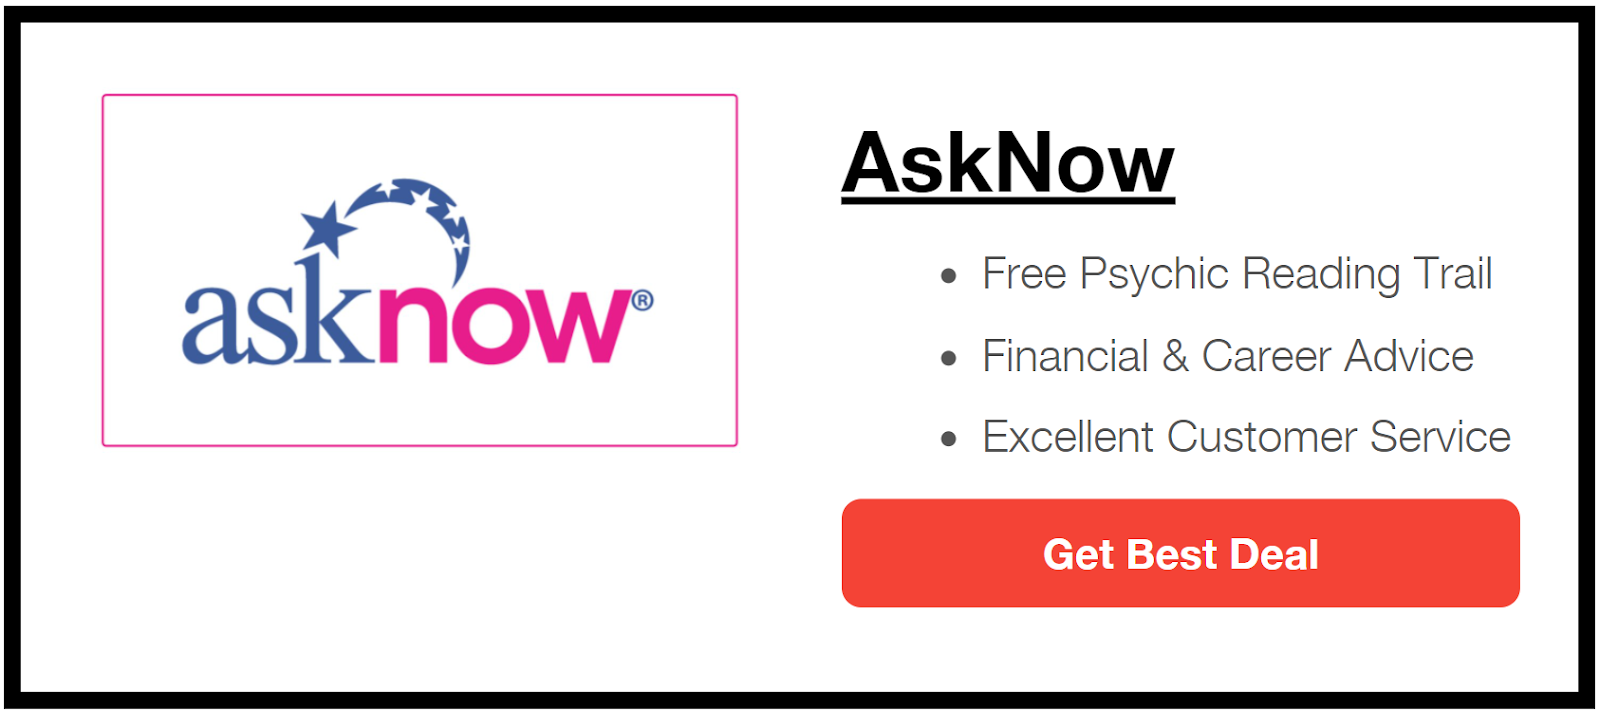 AskNow logo and its best deals on the right